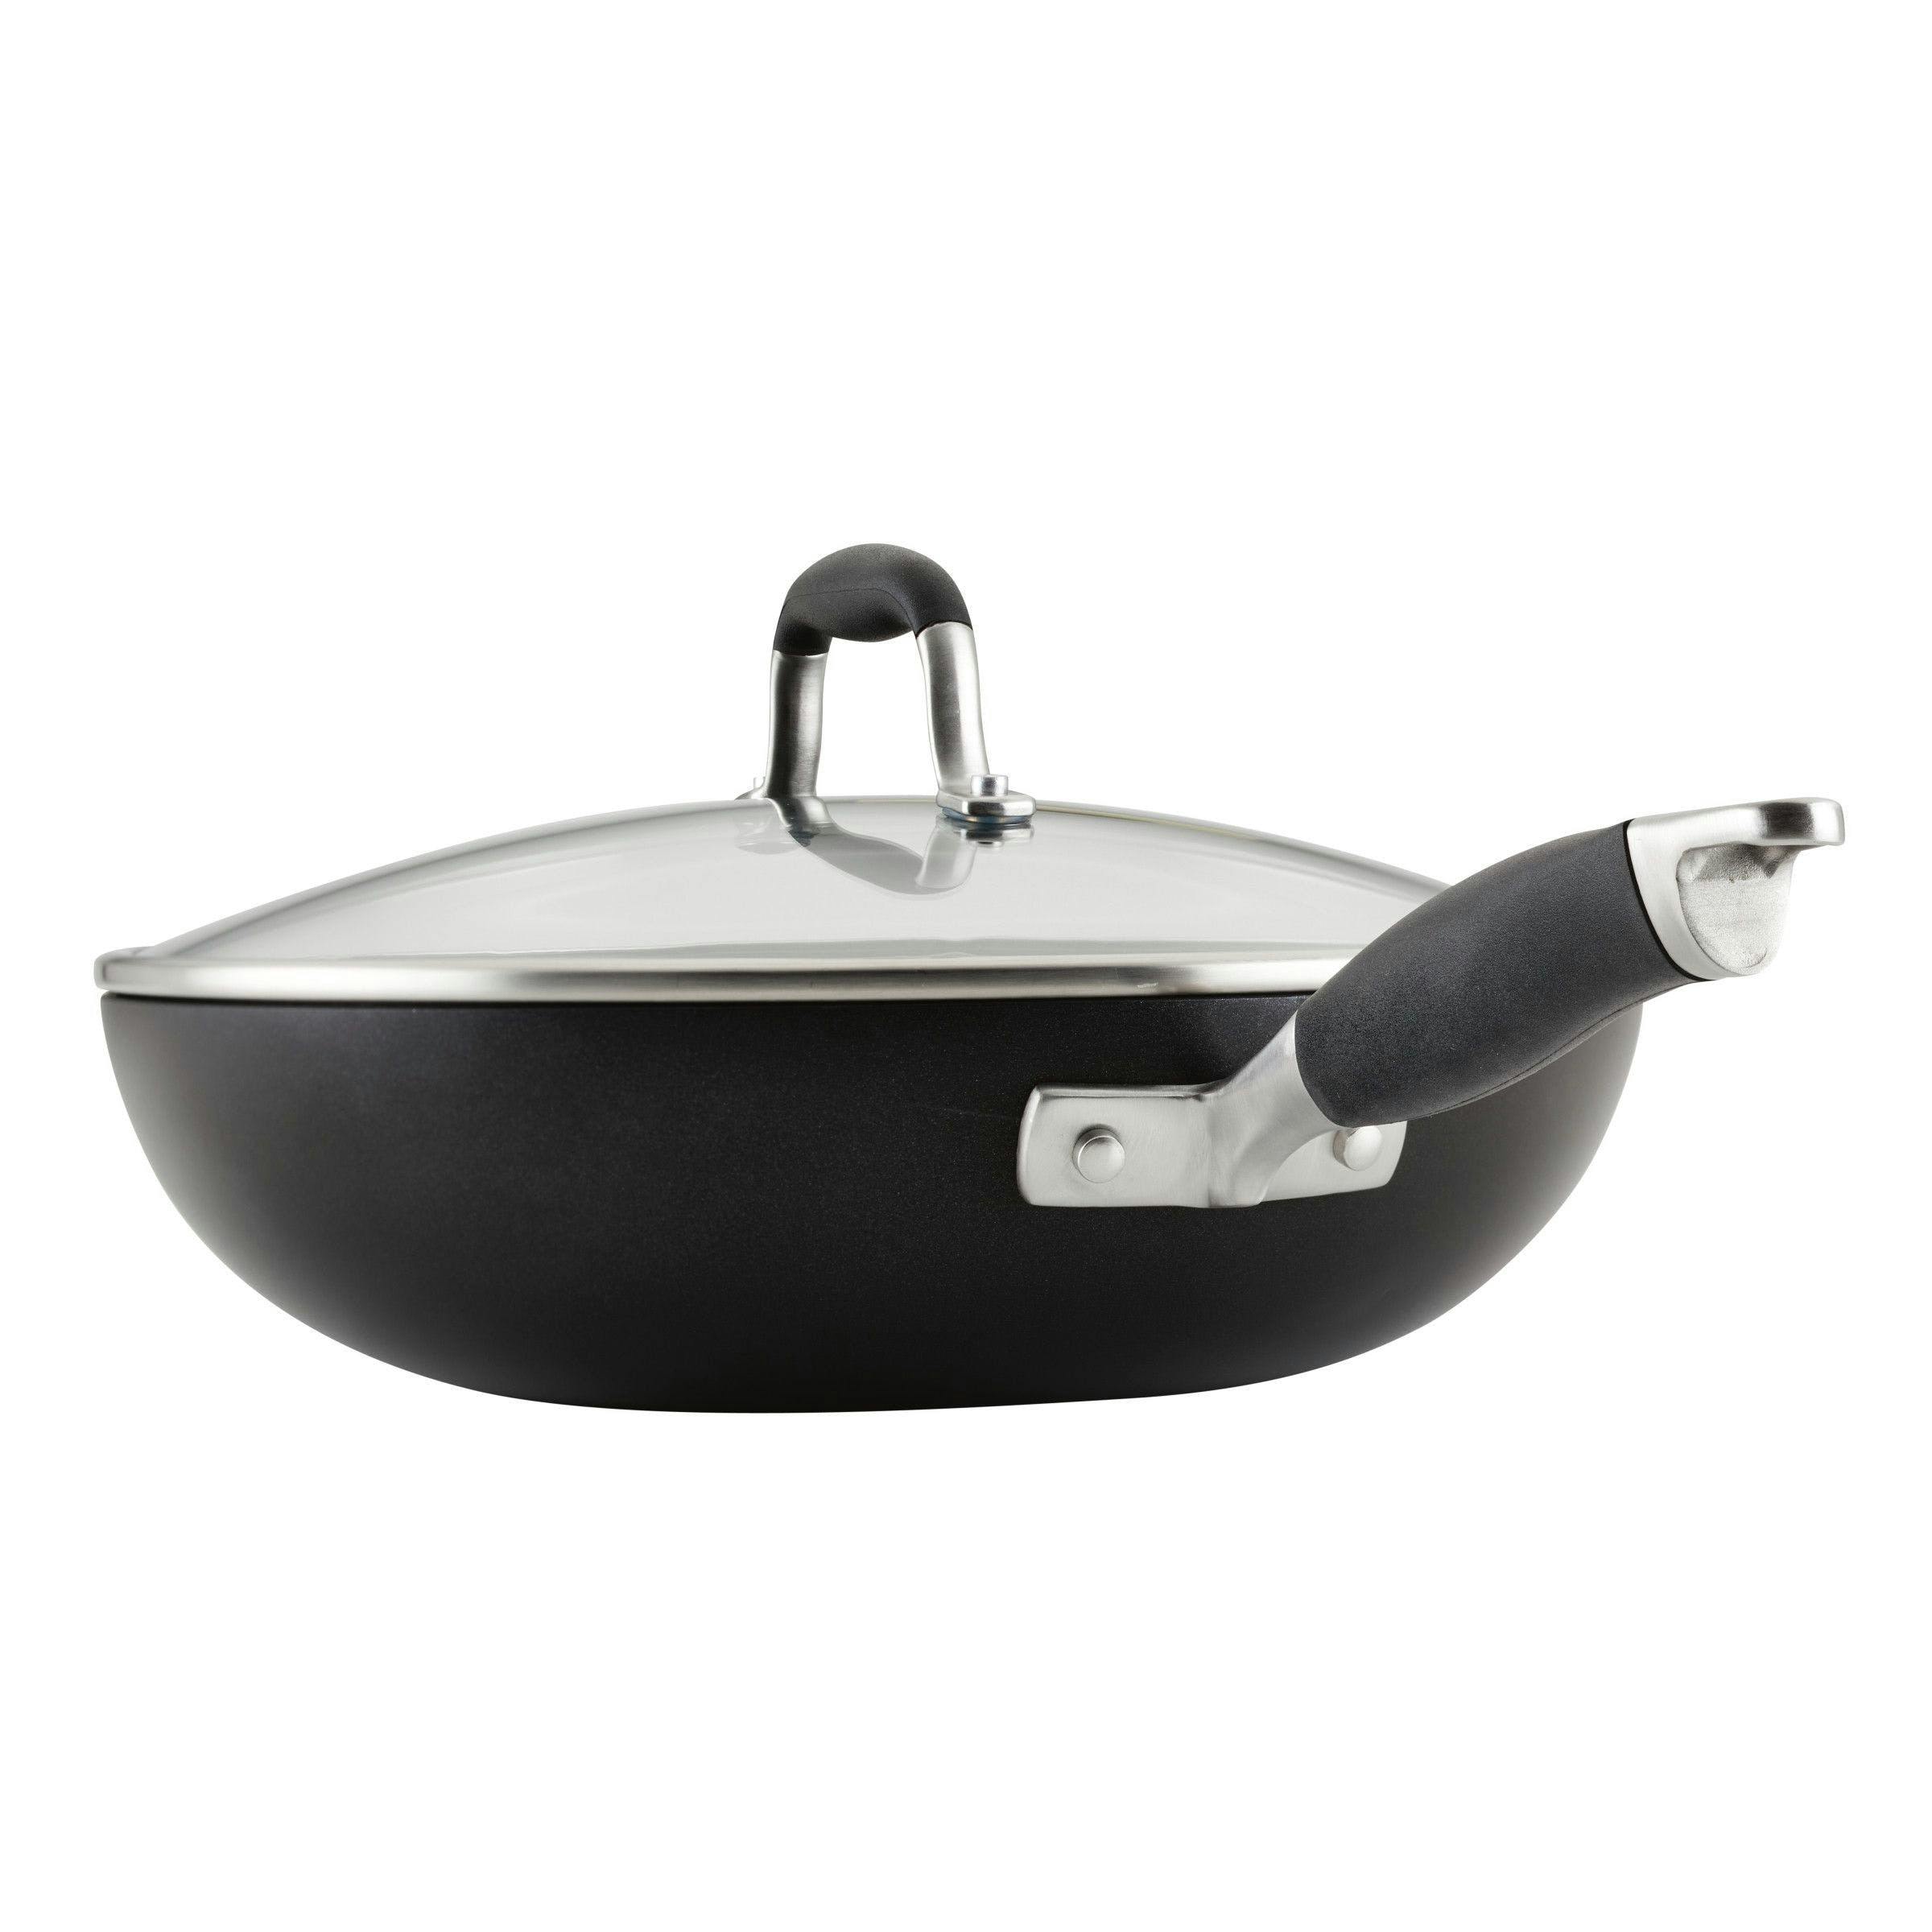 Anolon Advanced Home Hard-Anodized Nonstick Ultimate Pan with Lid